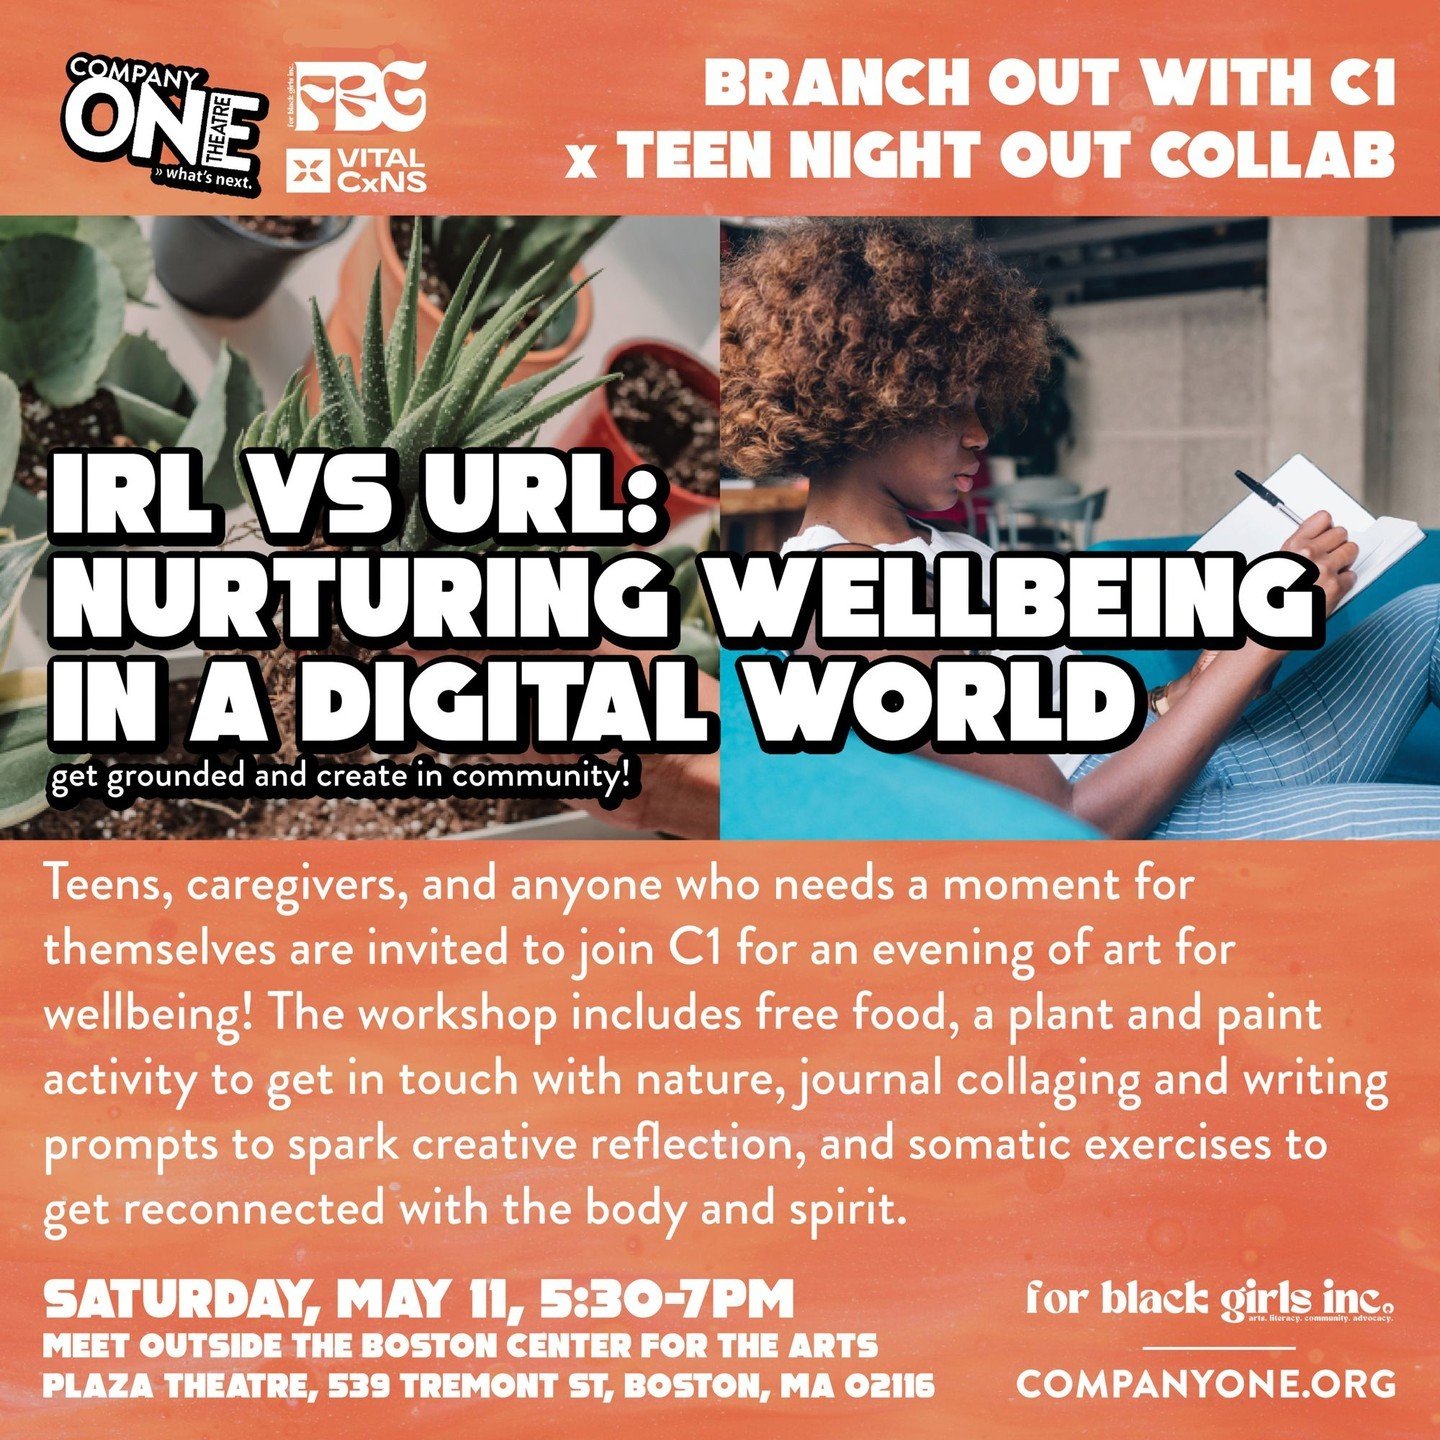 &quot;🎨✨ Join us for an evening of self-care through art. Teens, caregivers, and all seeking a moment of peace, come explore a variety of activities guided by For Black Girls, Vital CxNs, and Drama Therapist Jamila Batts Capitman. Get grounded, unle